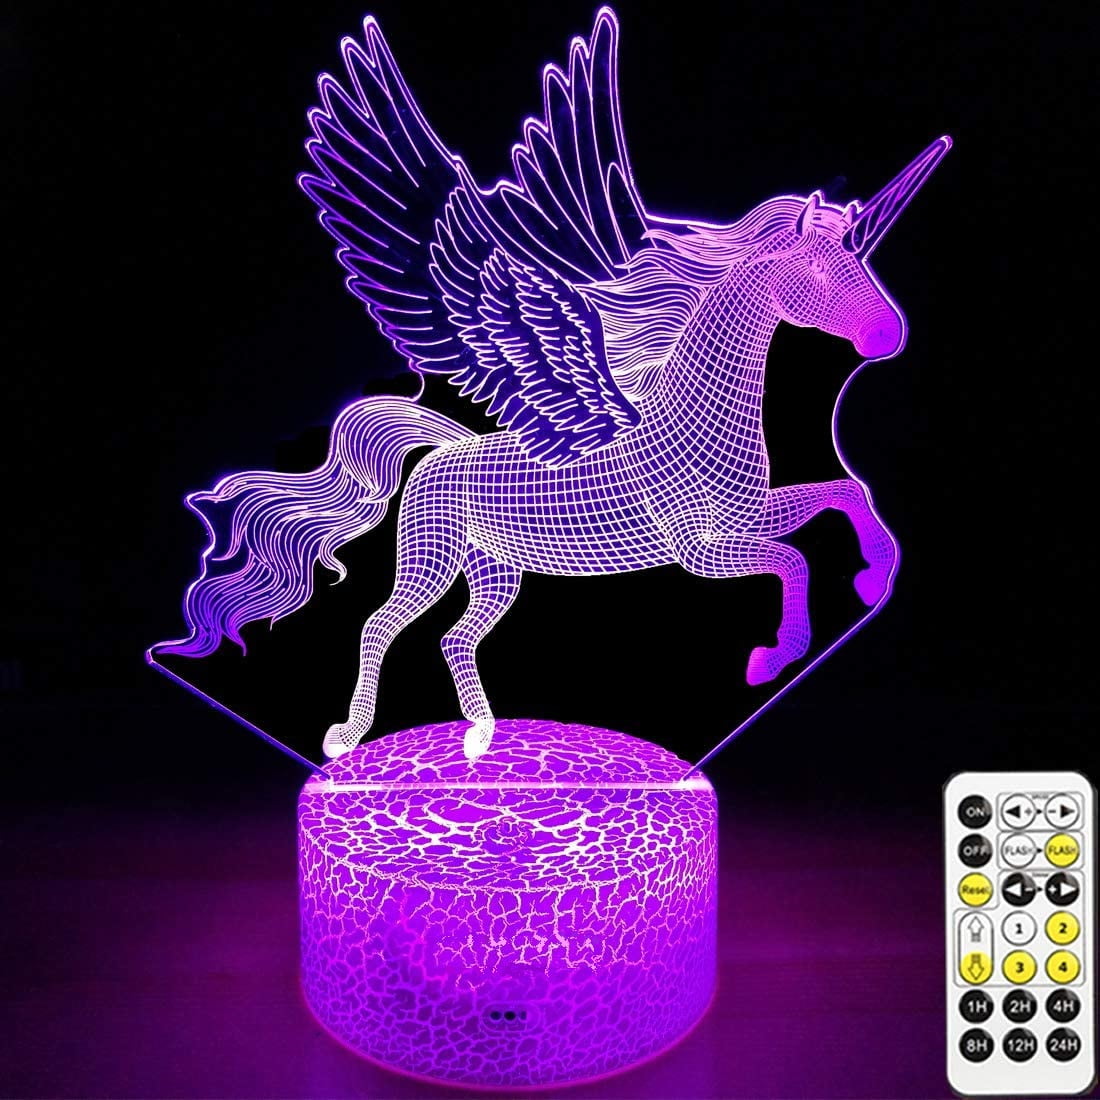 Unicorn 3D Night Light Remote LED Acrylic Table Lamp 7 Color Change for Kid GIFT 